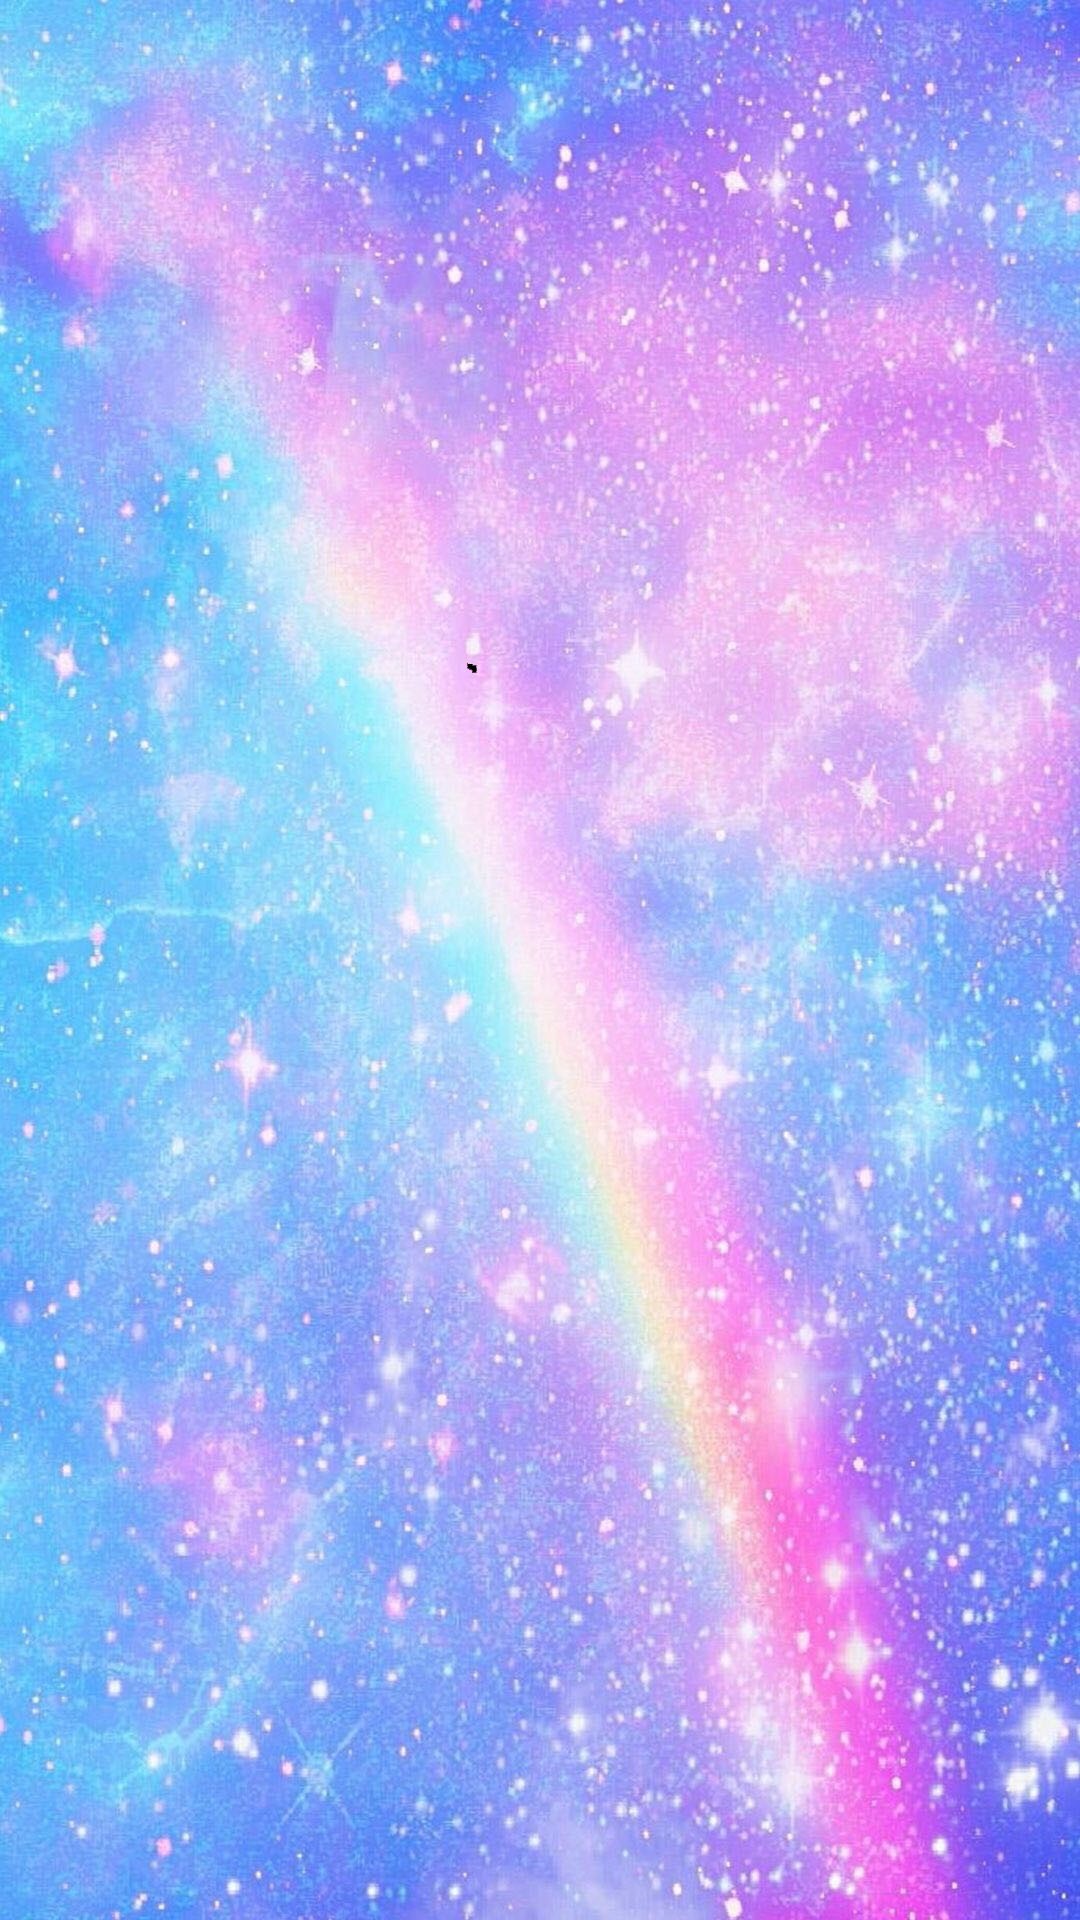 Explore Rainbow Galaxy, Backgrounds For Iphone, and more